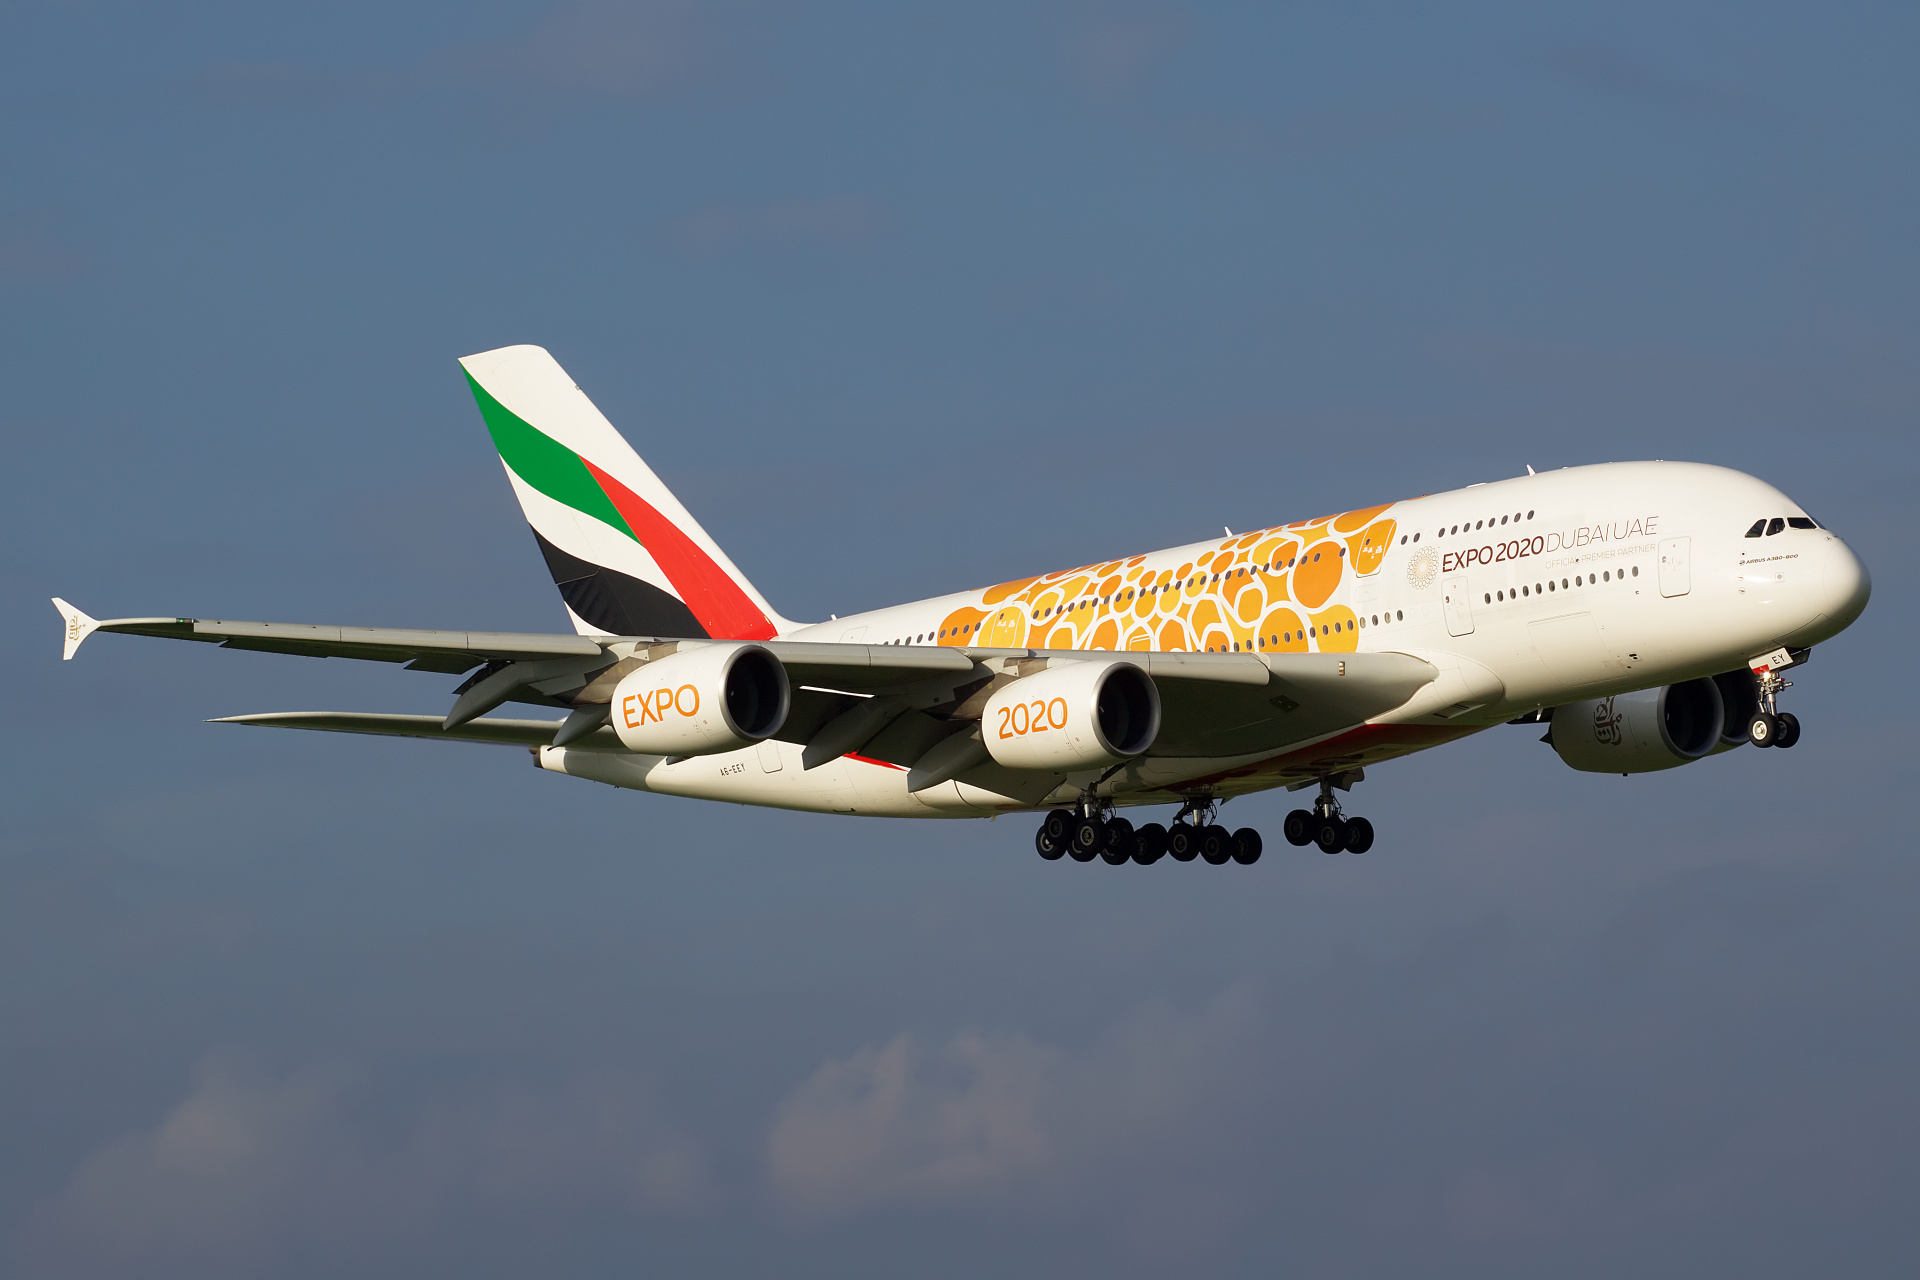 A6-EEY (EXPO 2020 Dubai - Opportunity livery) (Aircraft » Schiphol Spotting » Airbus A380-800 » Emirates)